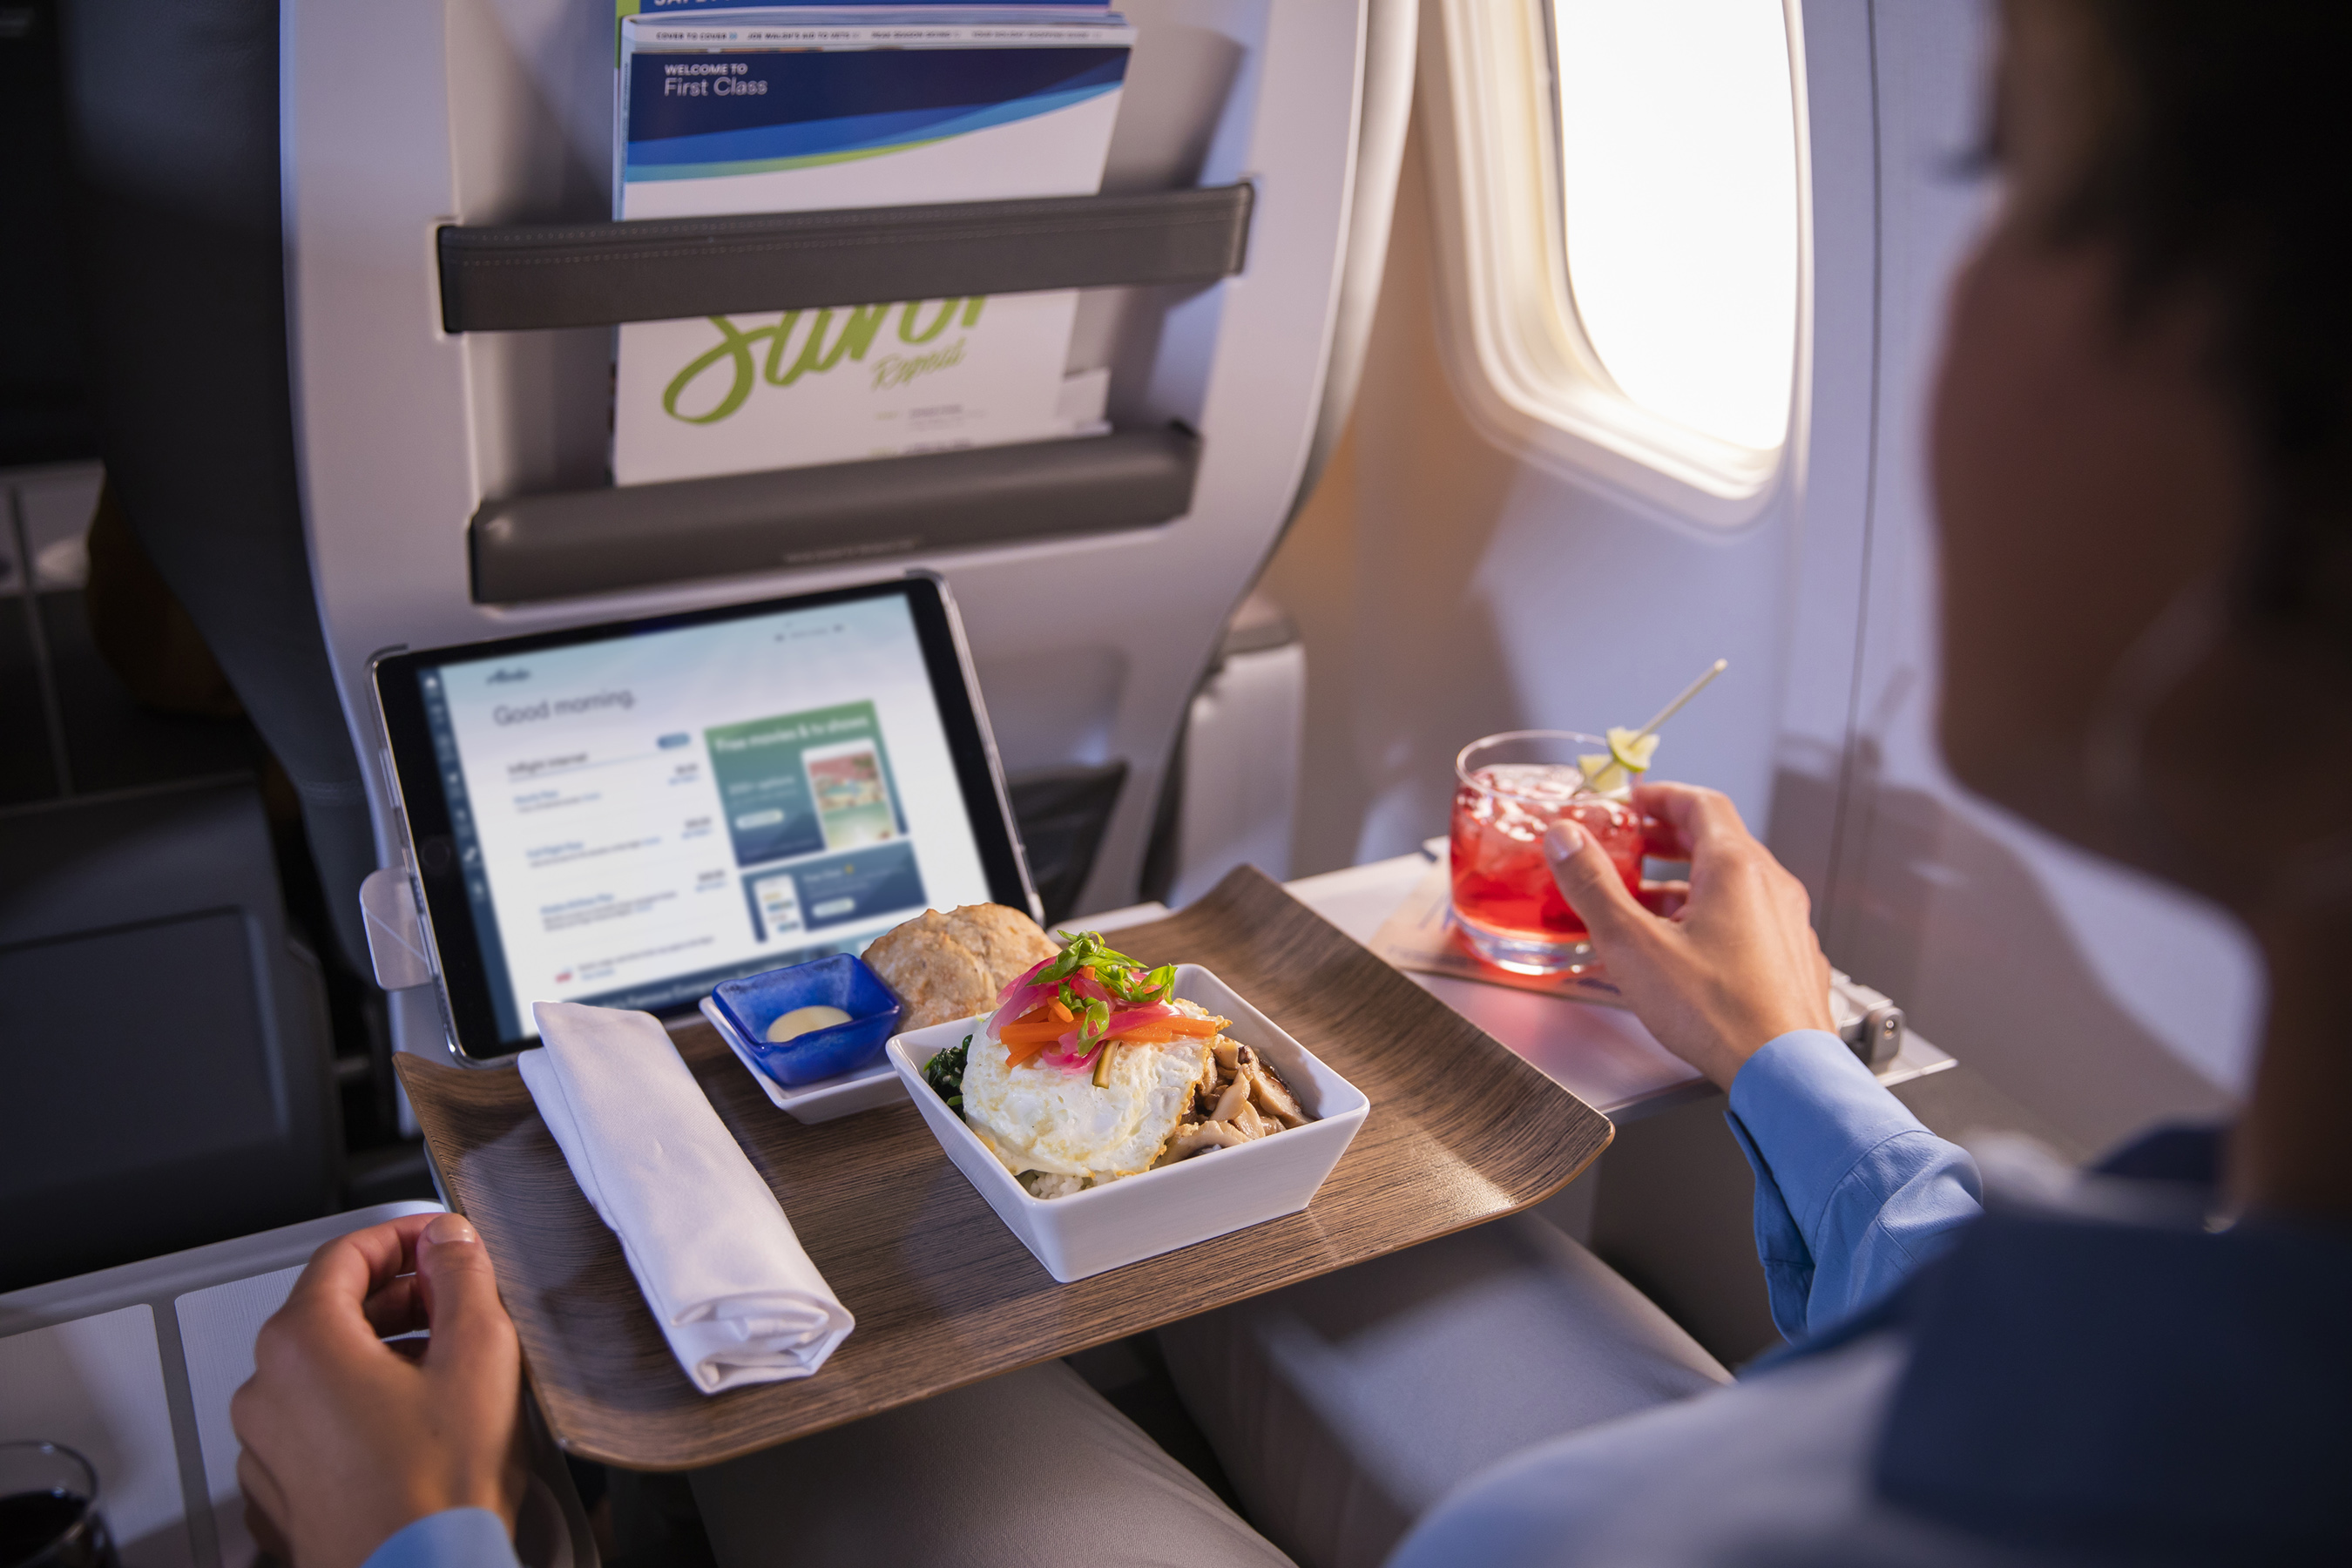 Alaska Airlines revamped its food and beverage offerings to elevate the inflight experience; rotating seasonal menus offer guests fresh, locally-sourced ingredients, as well as more feel-good options from beloved West Coast brands like Luke's Organic.